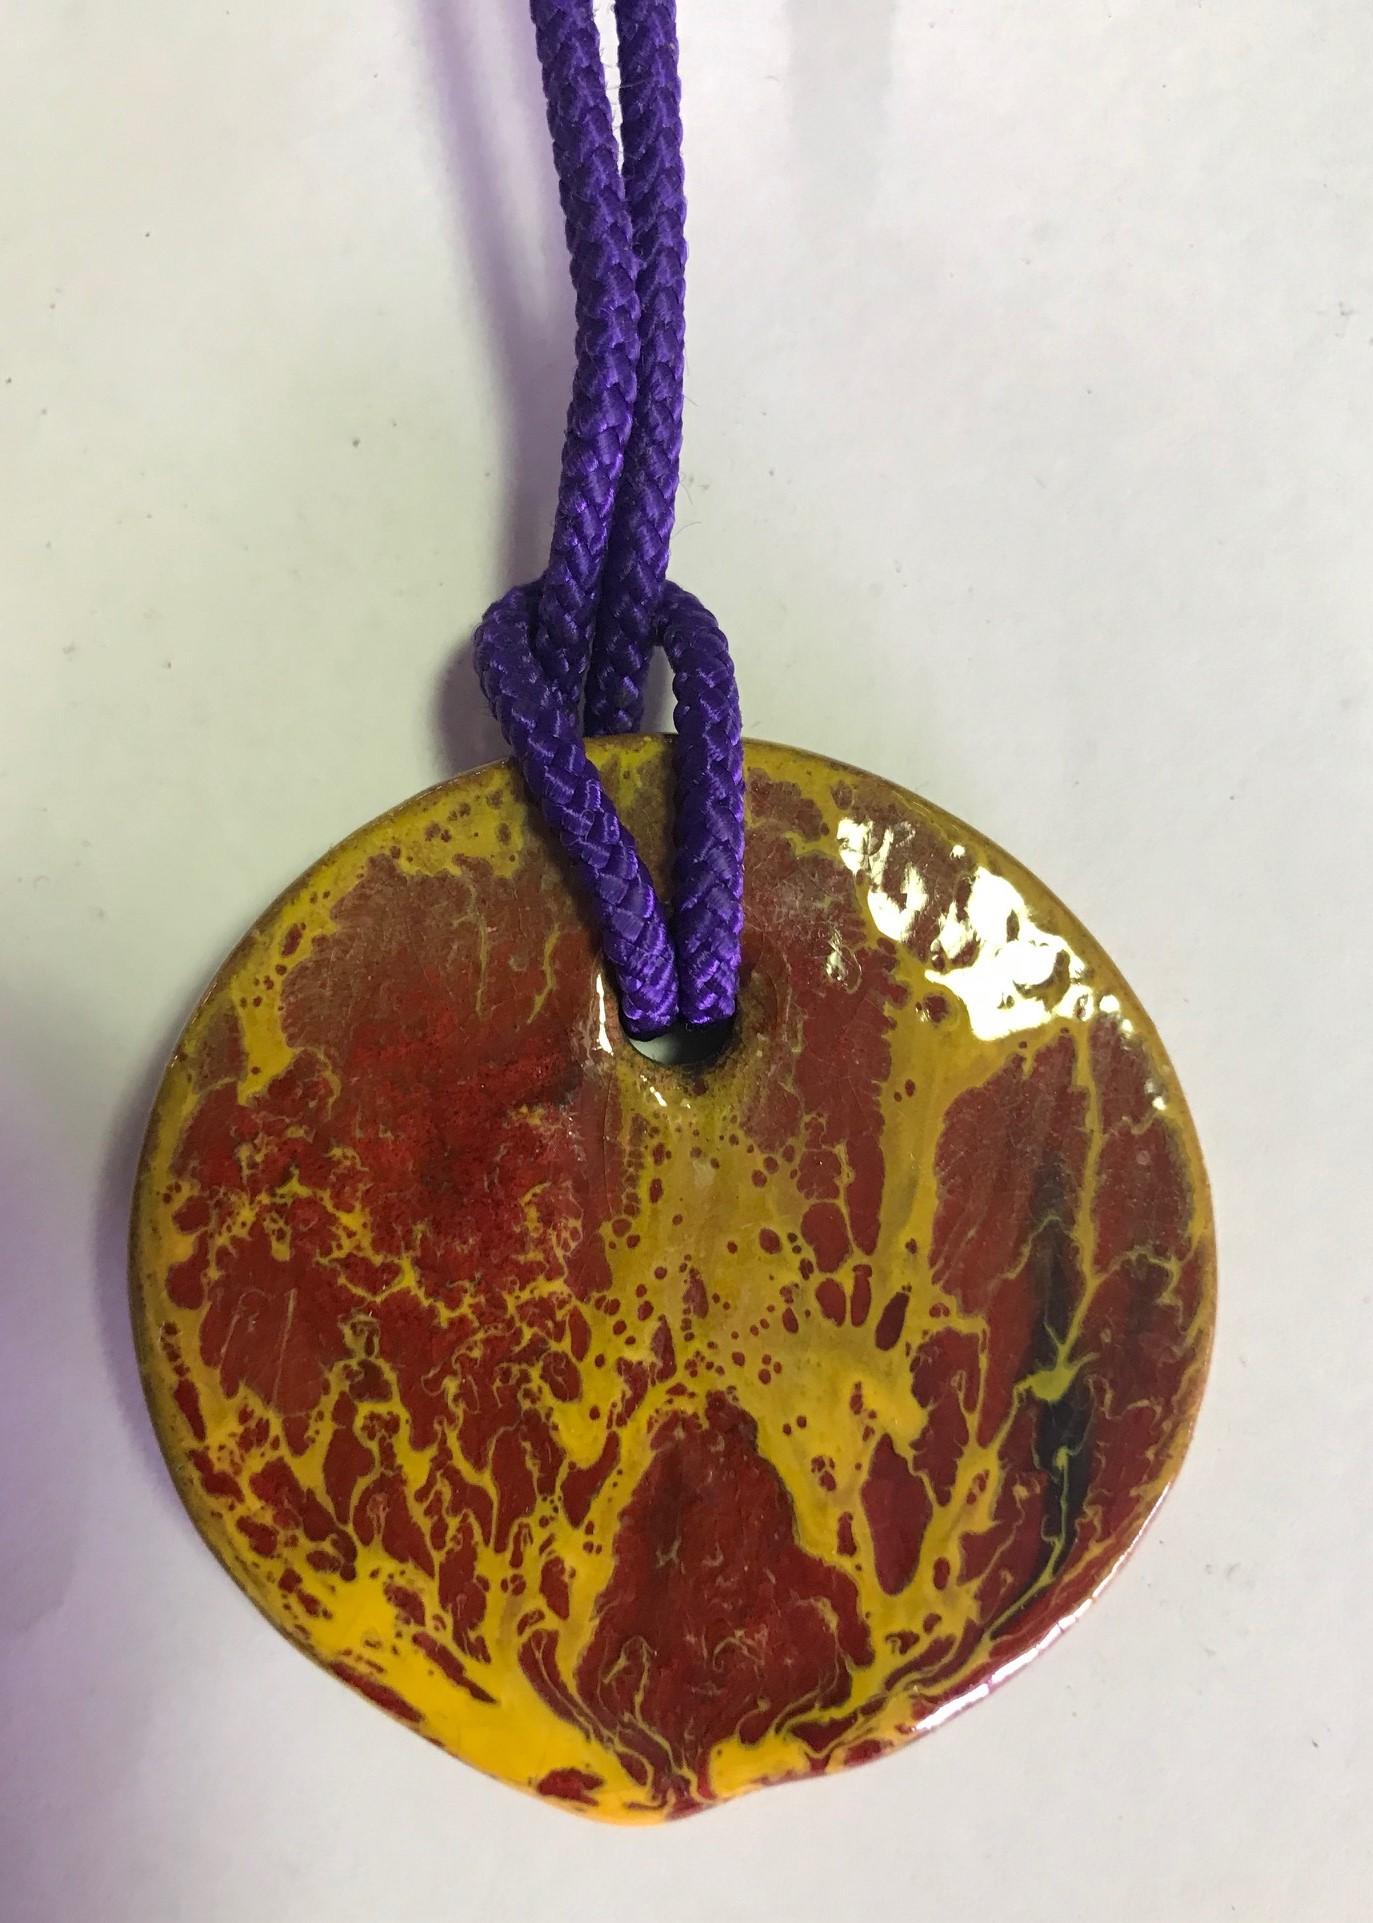 A beautifully glazed and colored ceramic pendant by famed midcentury American artist/potter Doyle Lane. Lane was a glaze specialist much like Glen Lukens and Otto Natzler. His colorful glazes would melt, bubble and crack over his pieces creating a